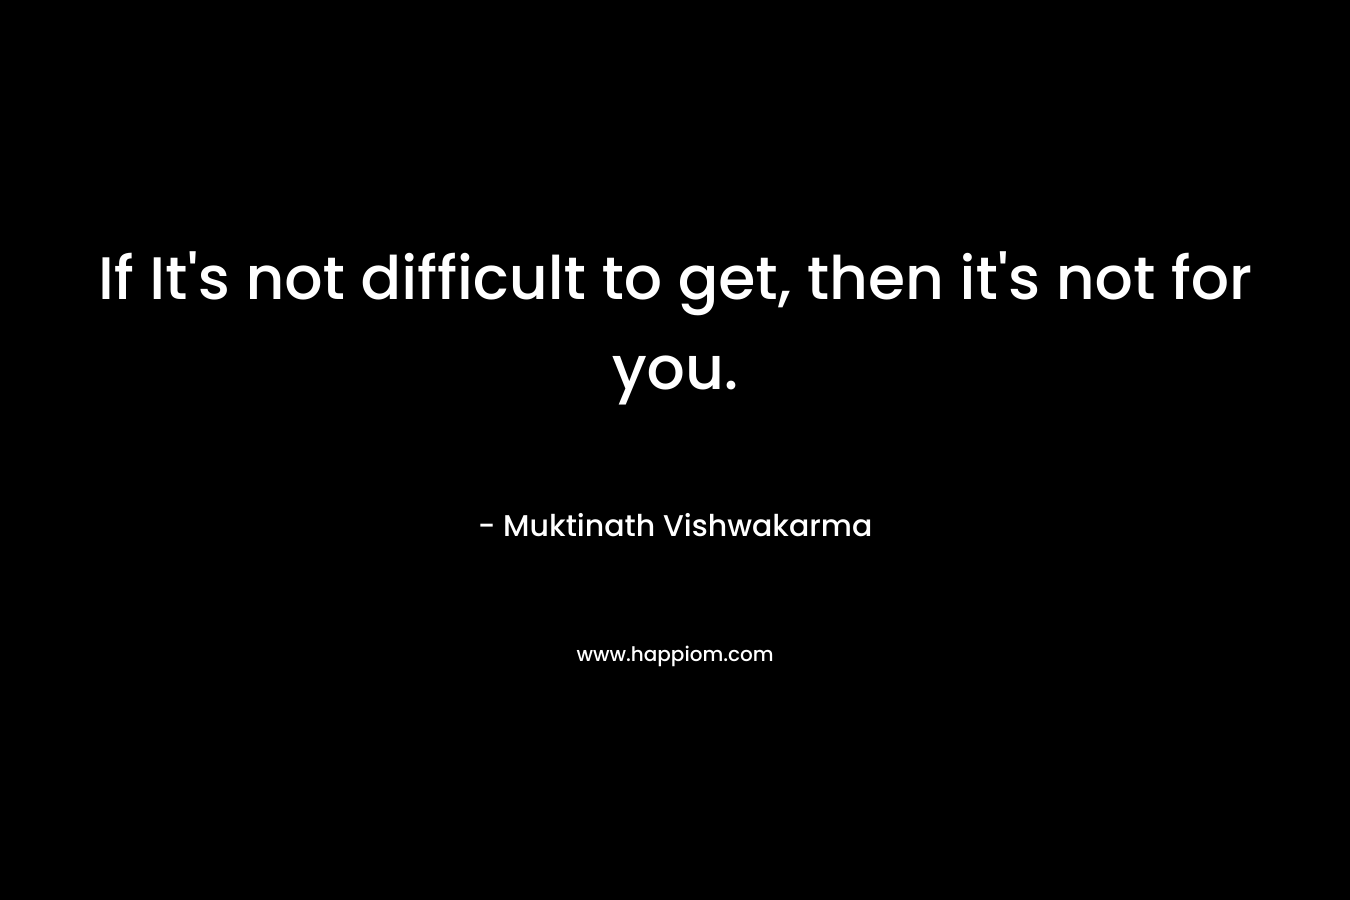 If It’s not difficult to get, then it’s not for you. – Muktinath Vishwakarma